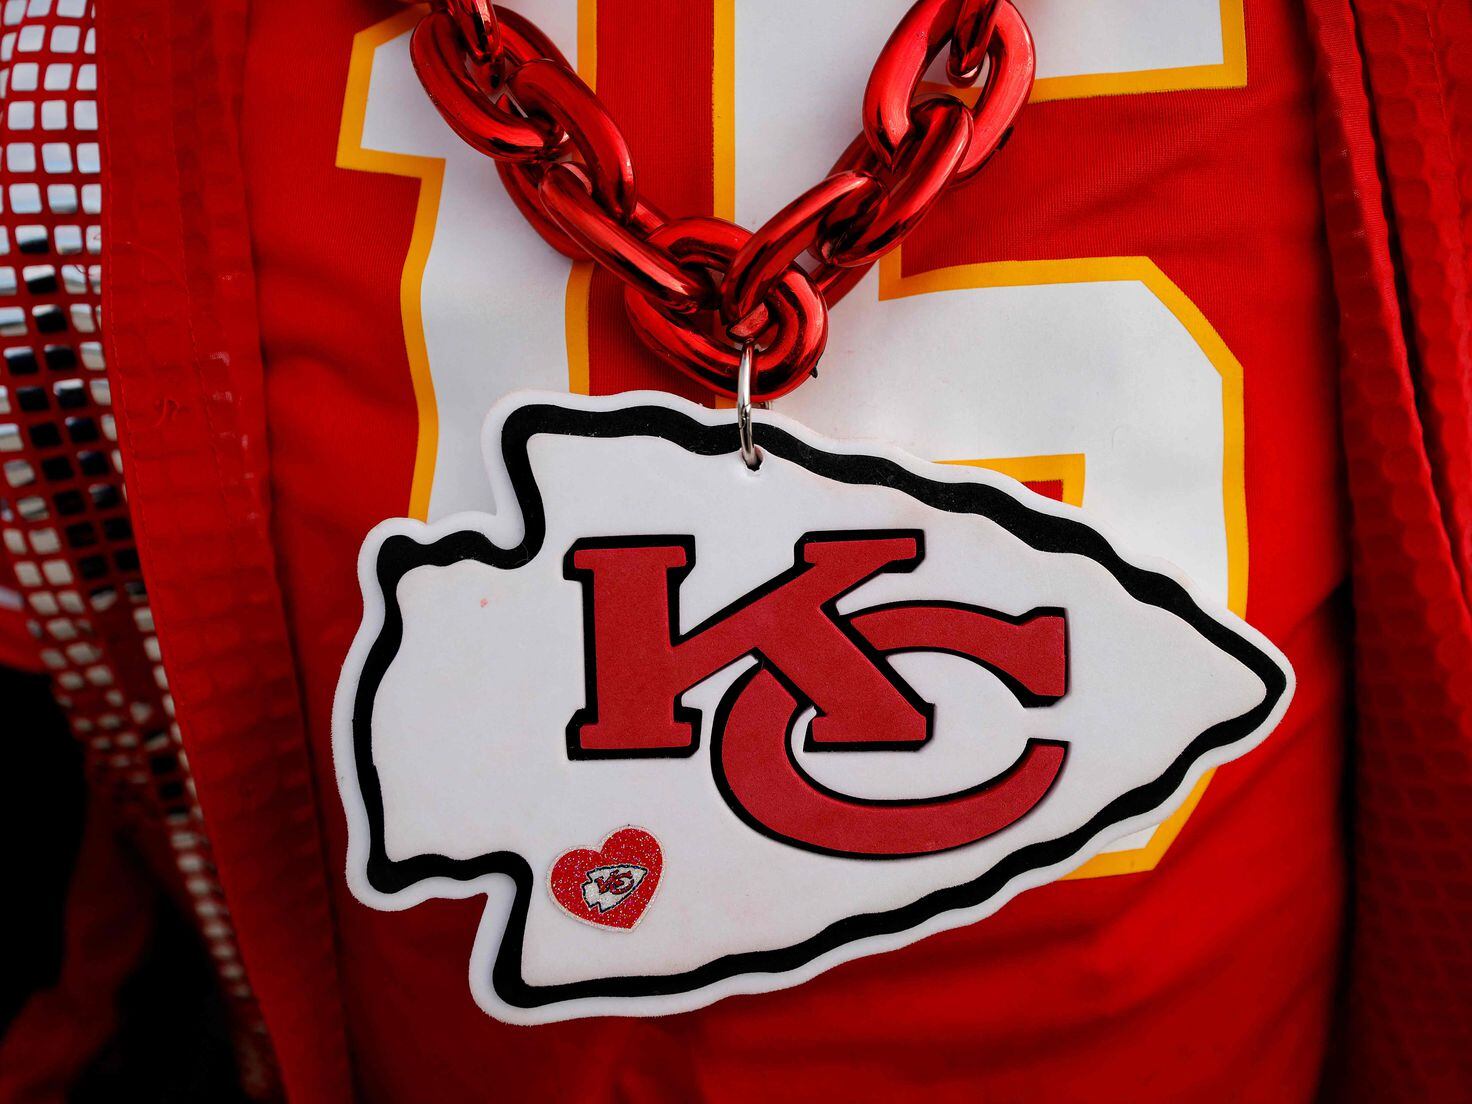 Why do the Kansas City Chiefs wear the color red? What is the